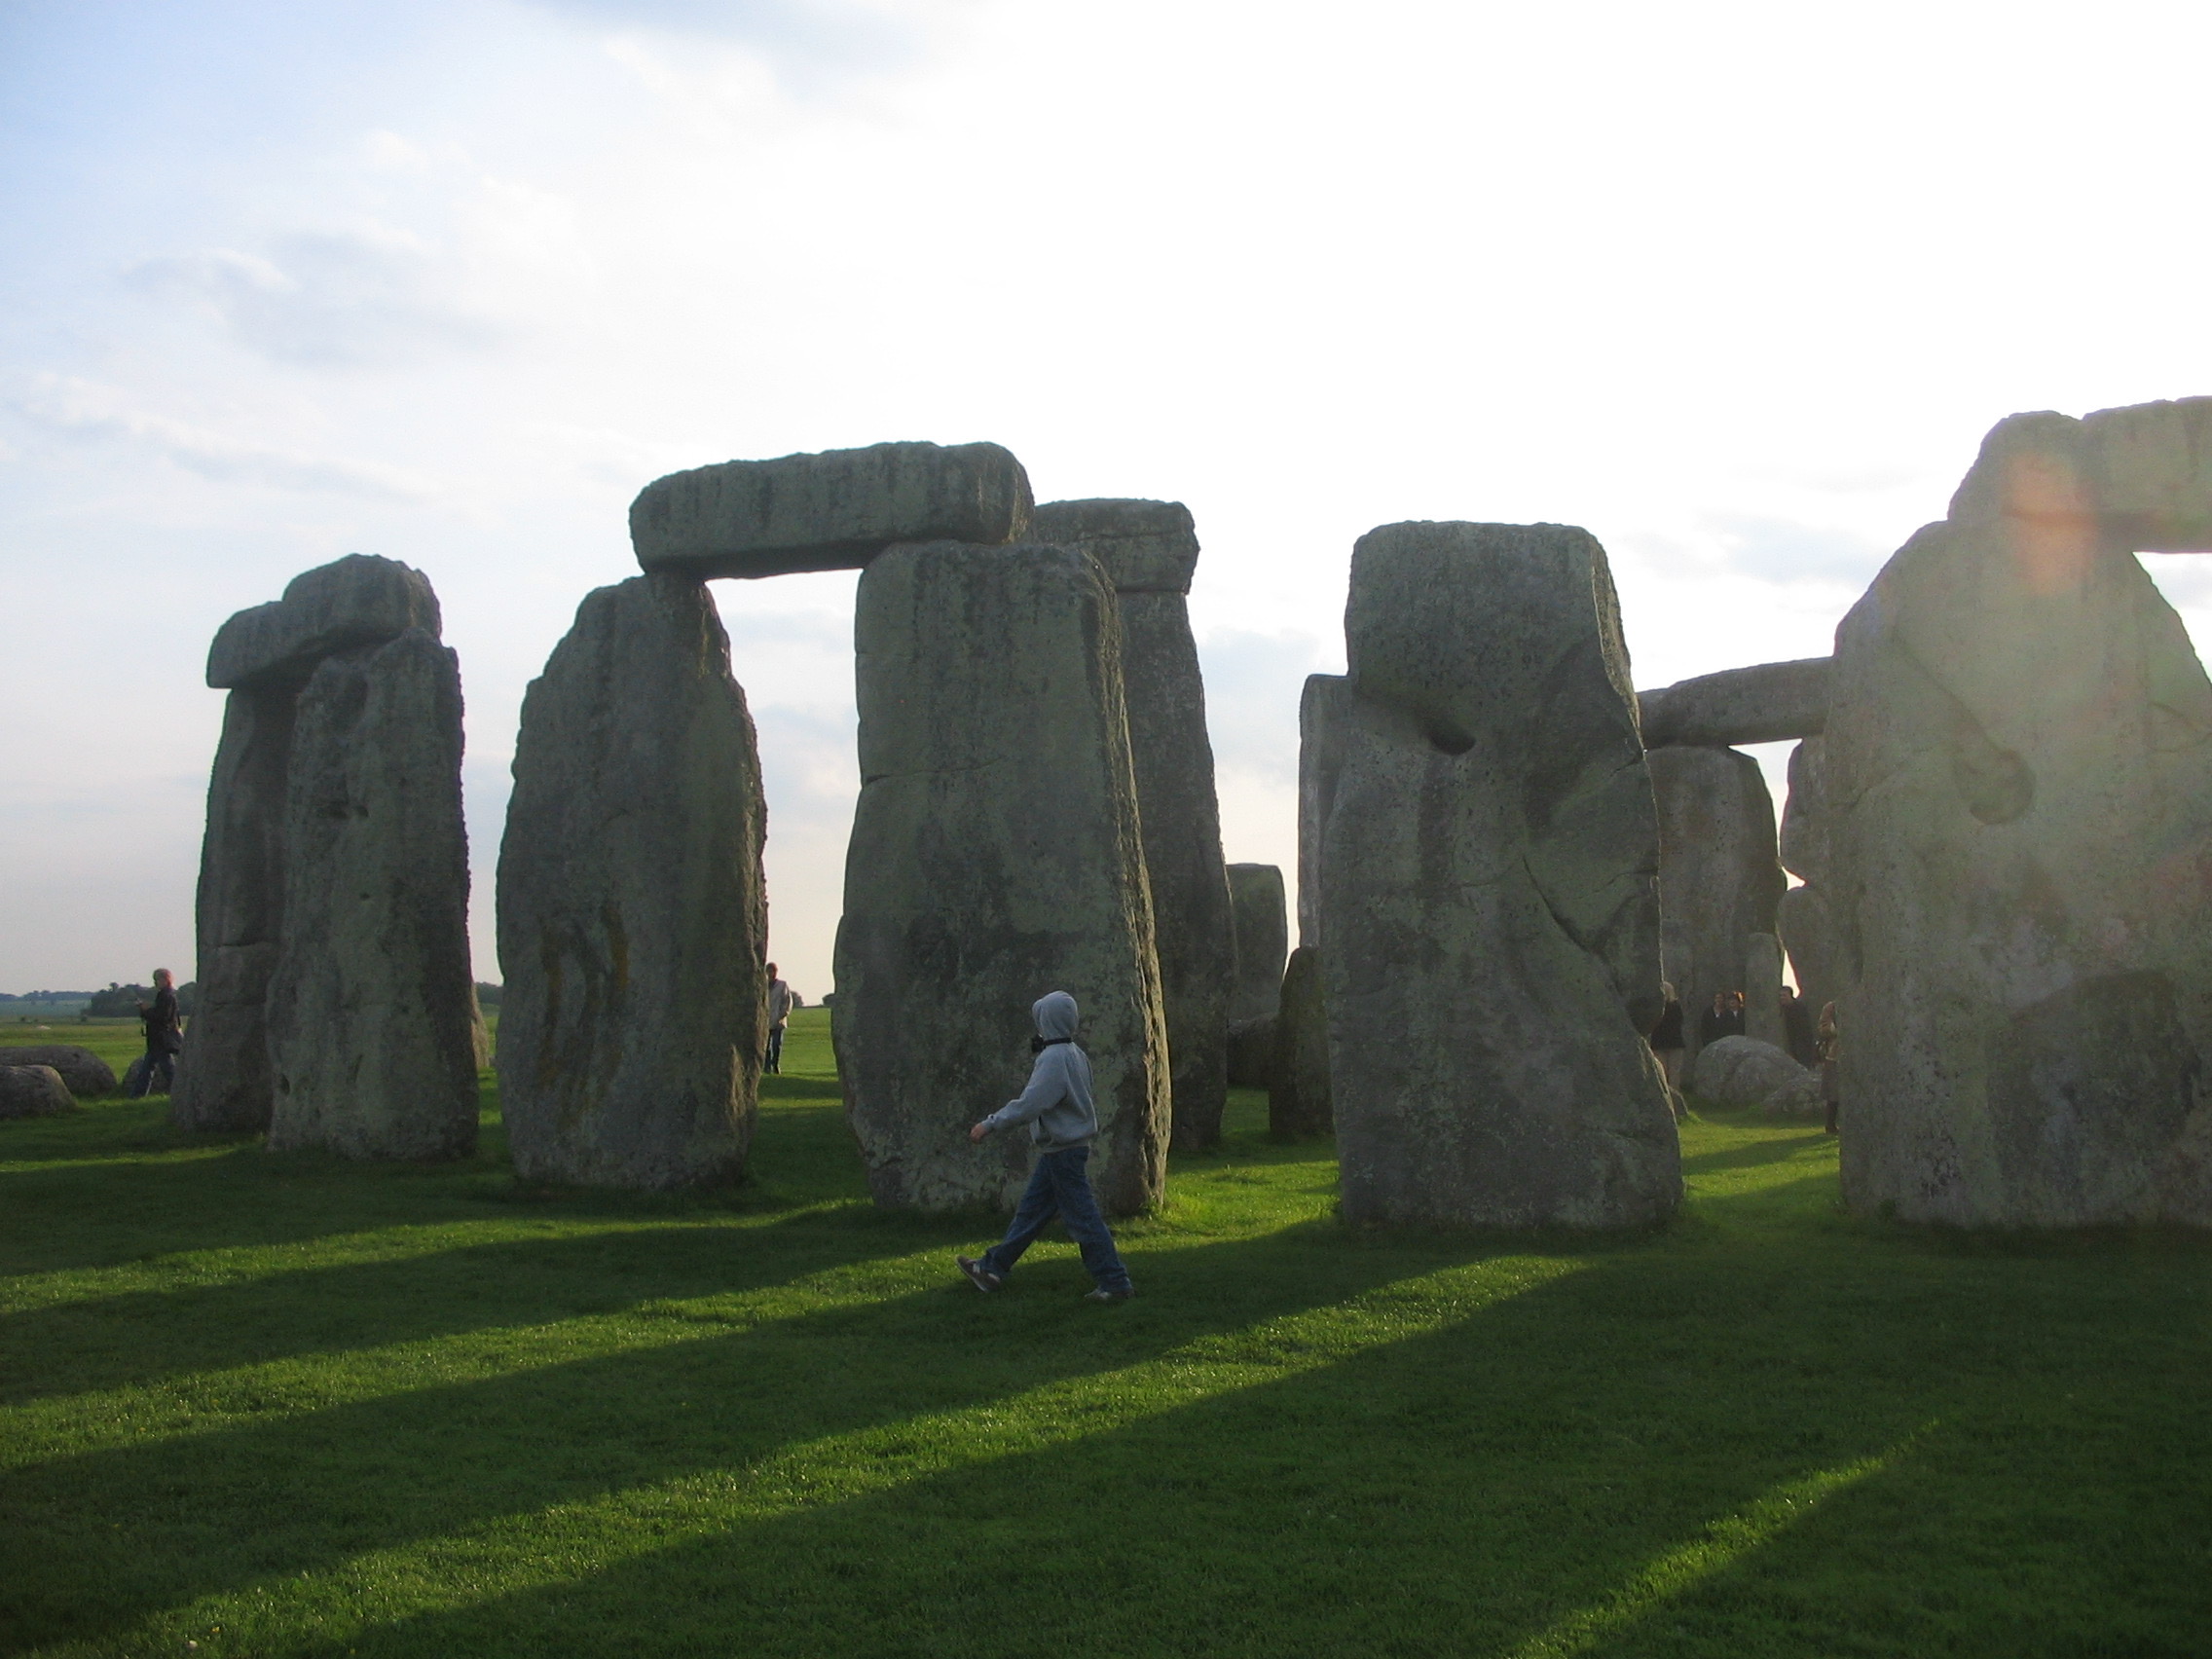 a person walking in a grassy area with large rocks with Stonehenge in the background